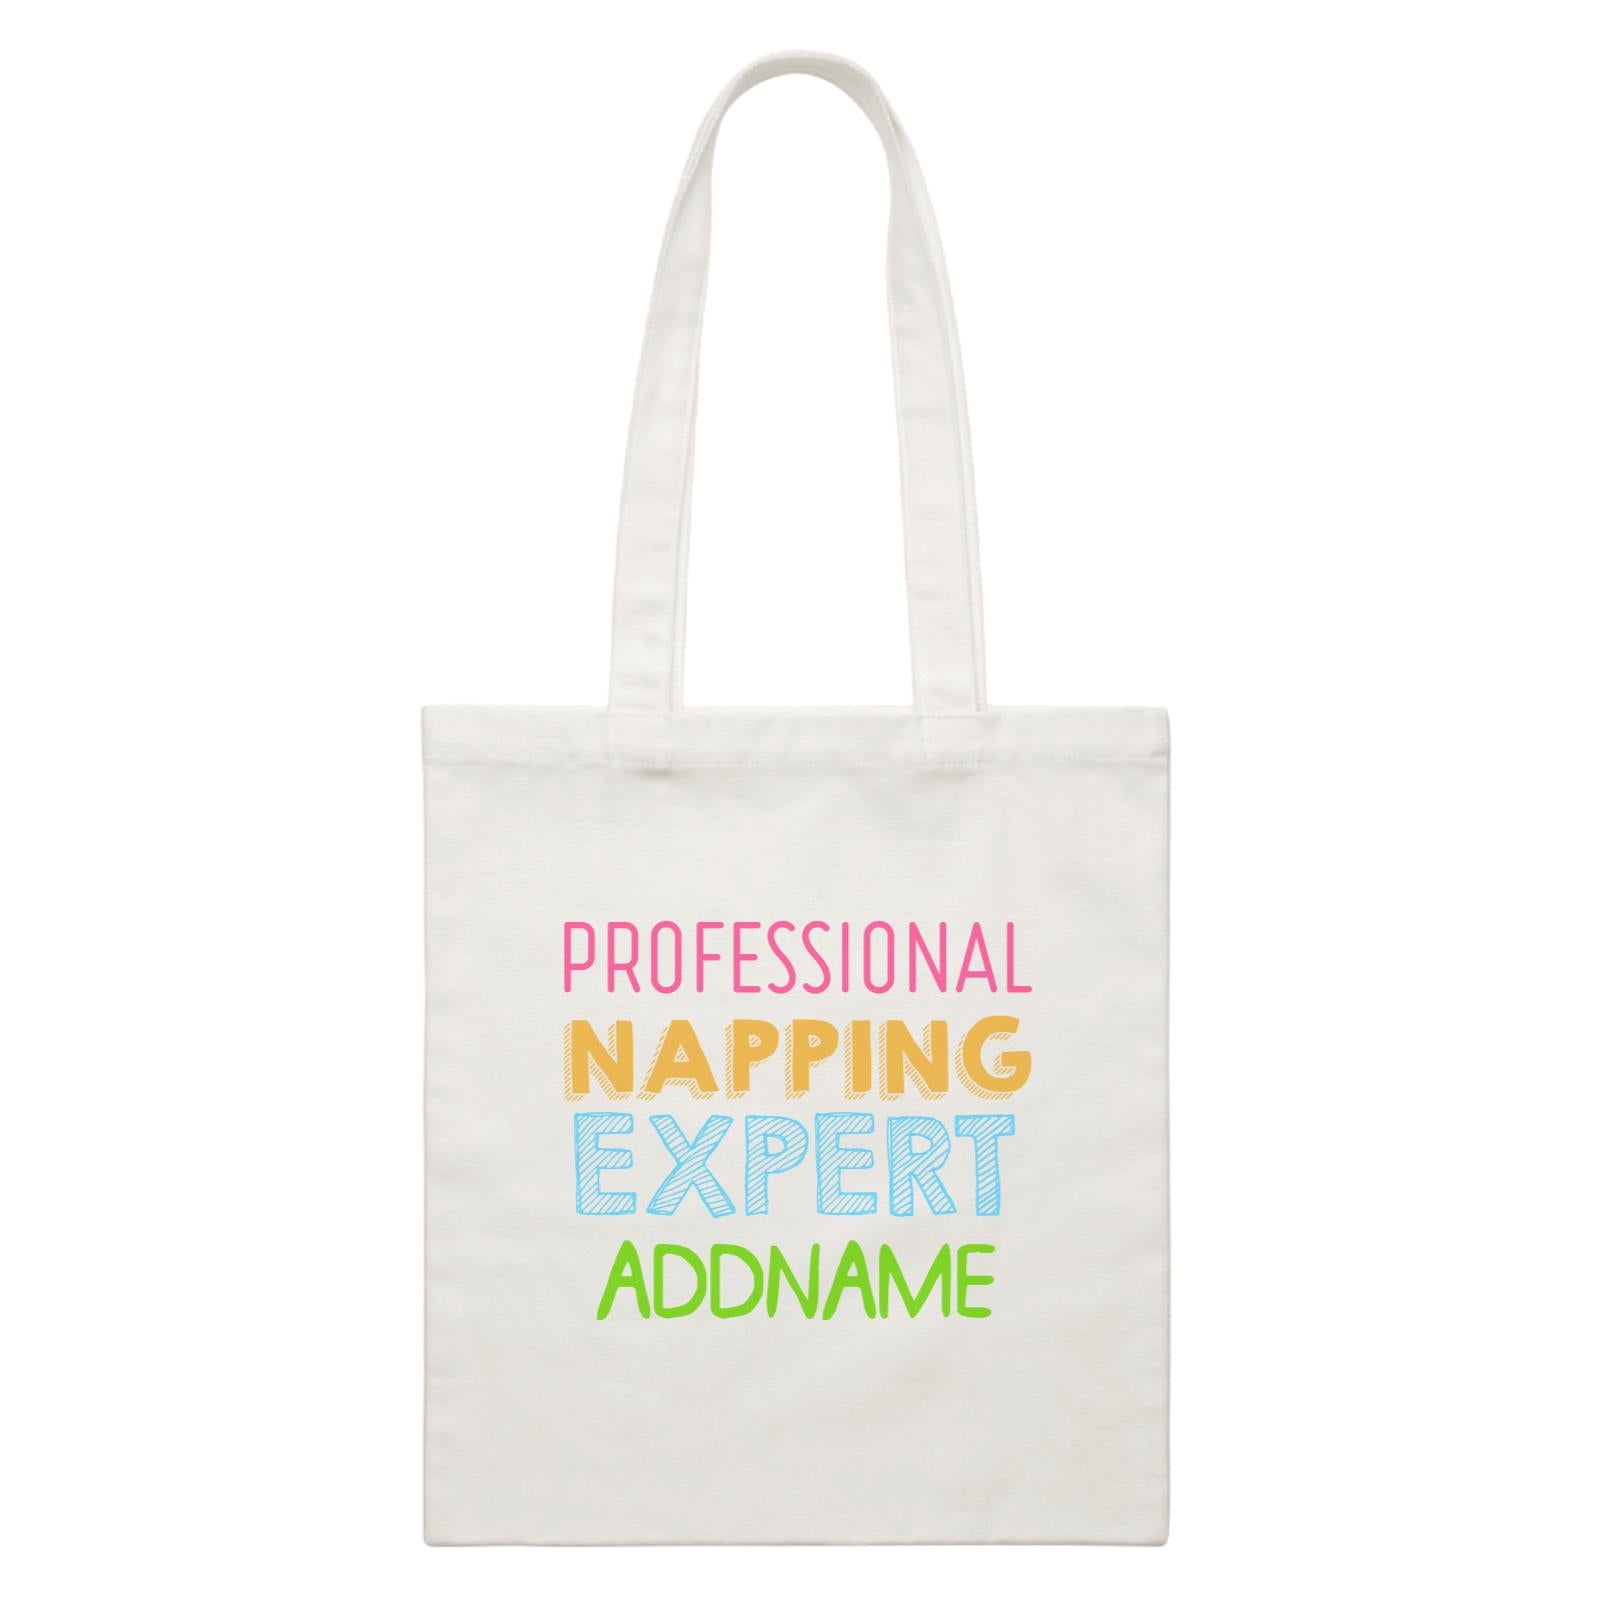 Professional Napping Expert Addname White Canvas Bag